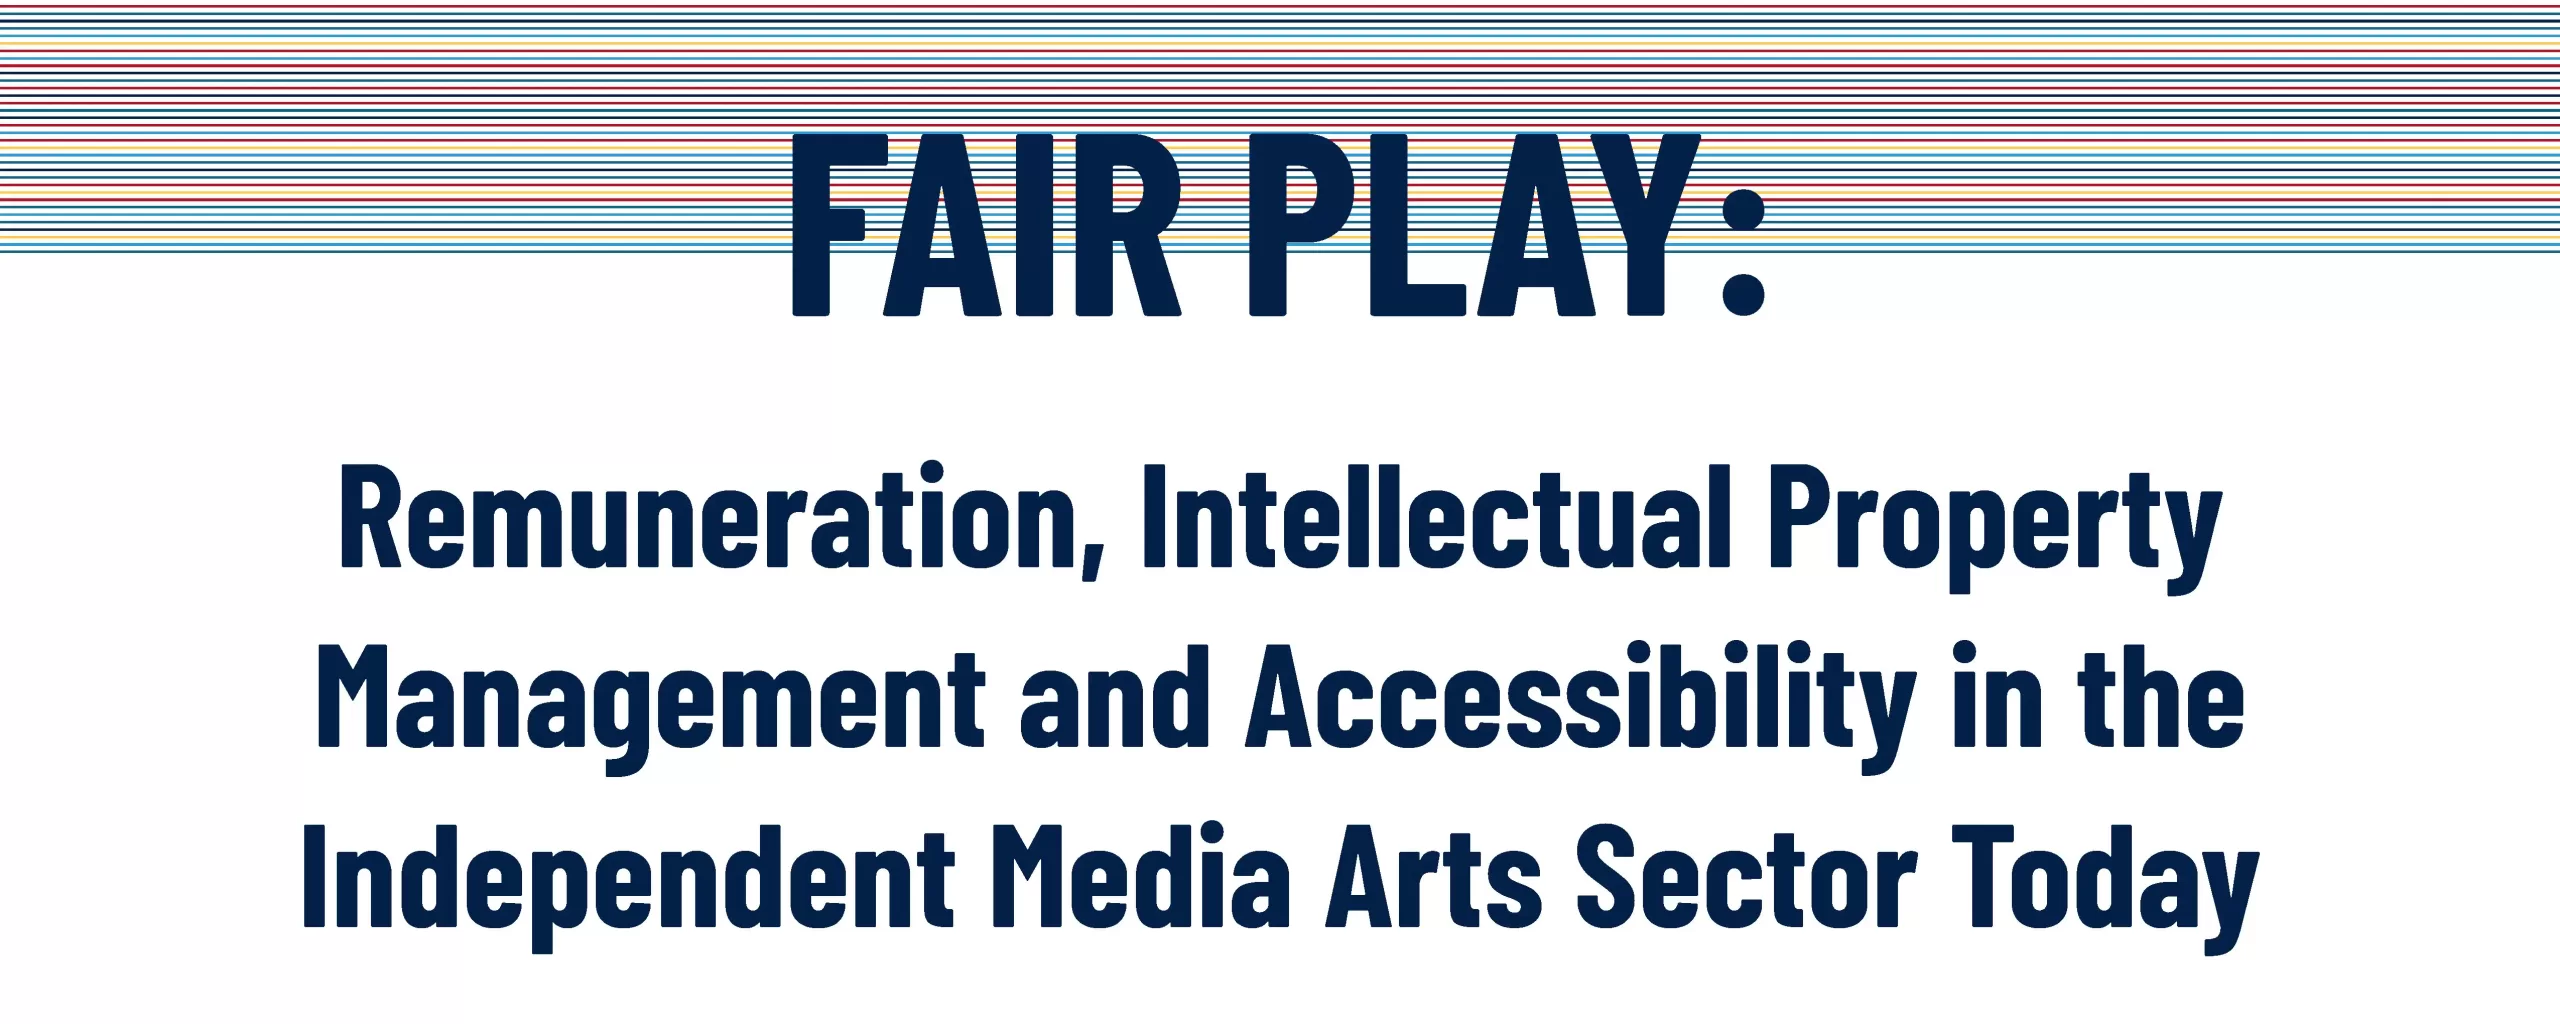 Fair Play: Remuneration, Intellectual Property Management and Accessible in the Independent Media Arts Sector Today